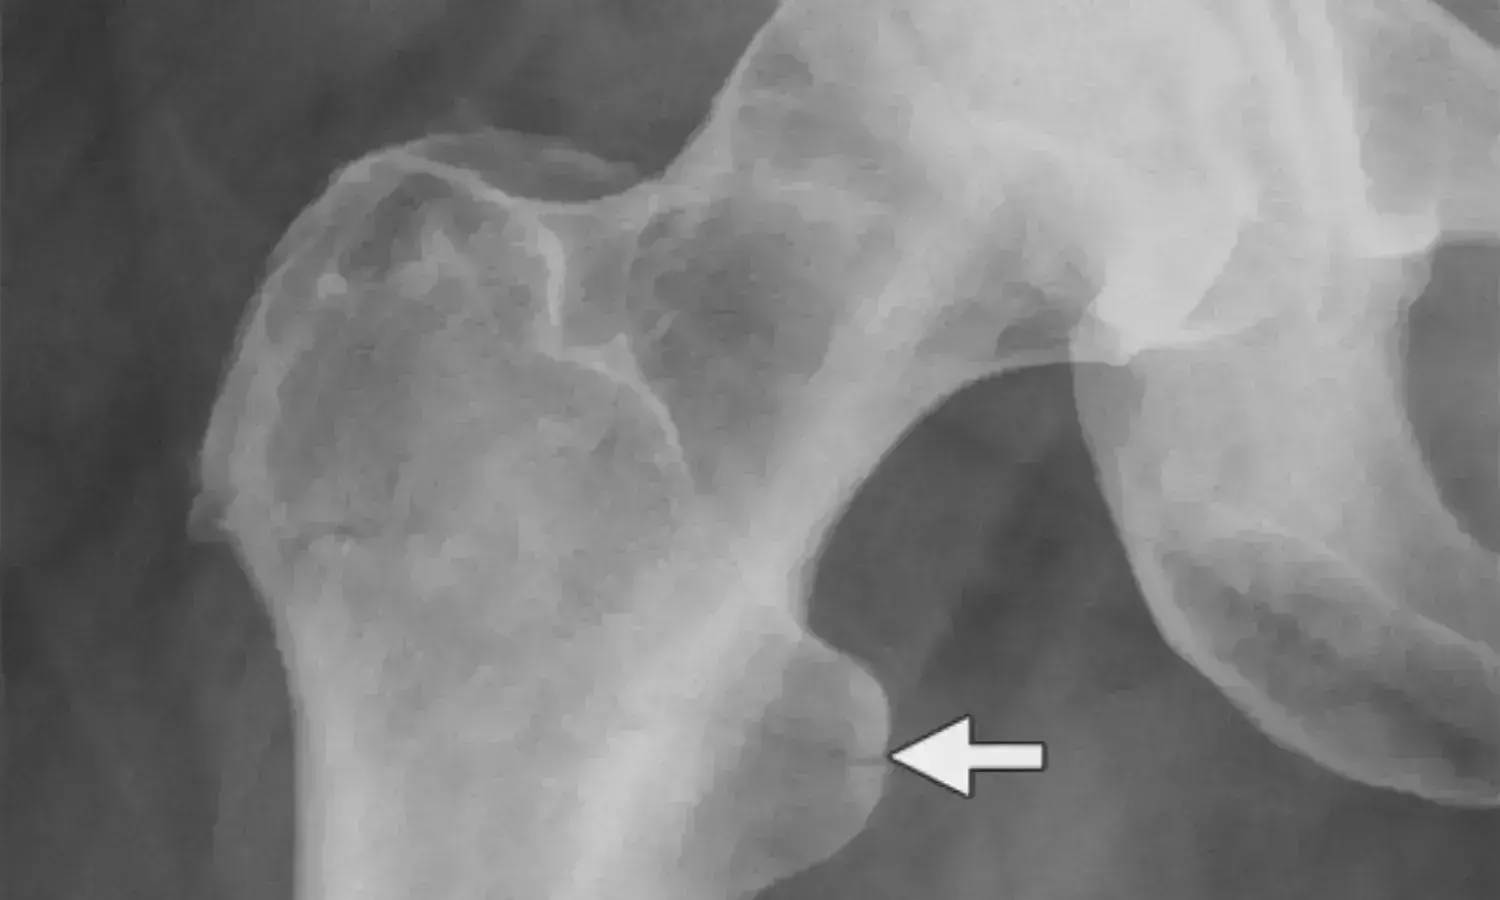 Nonoperative management viable option for proximal femoral fractures in frail patients